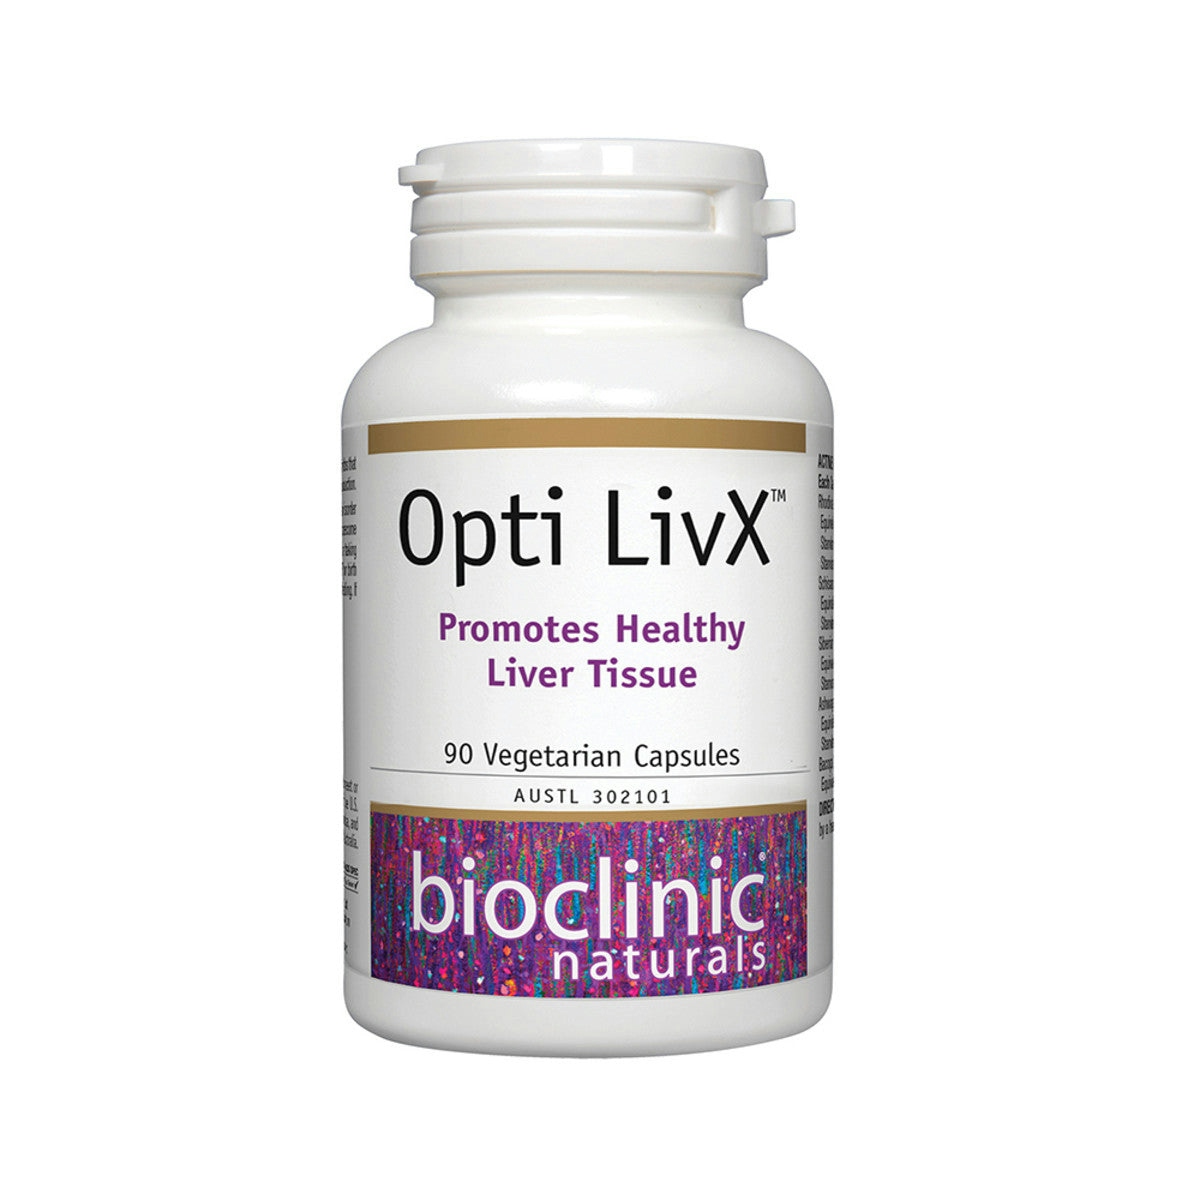 Image of Bioclinic Naturals Opti LivX 90vc with a white background